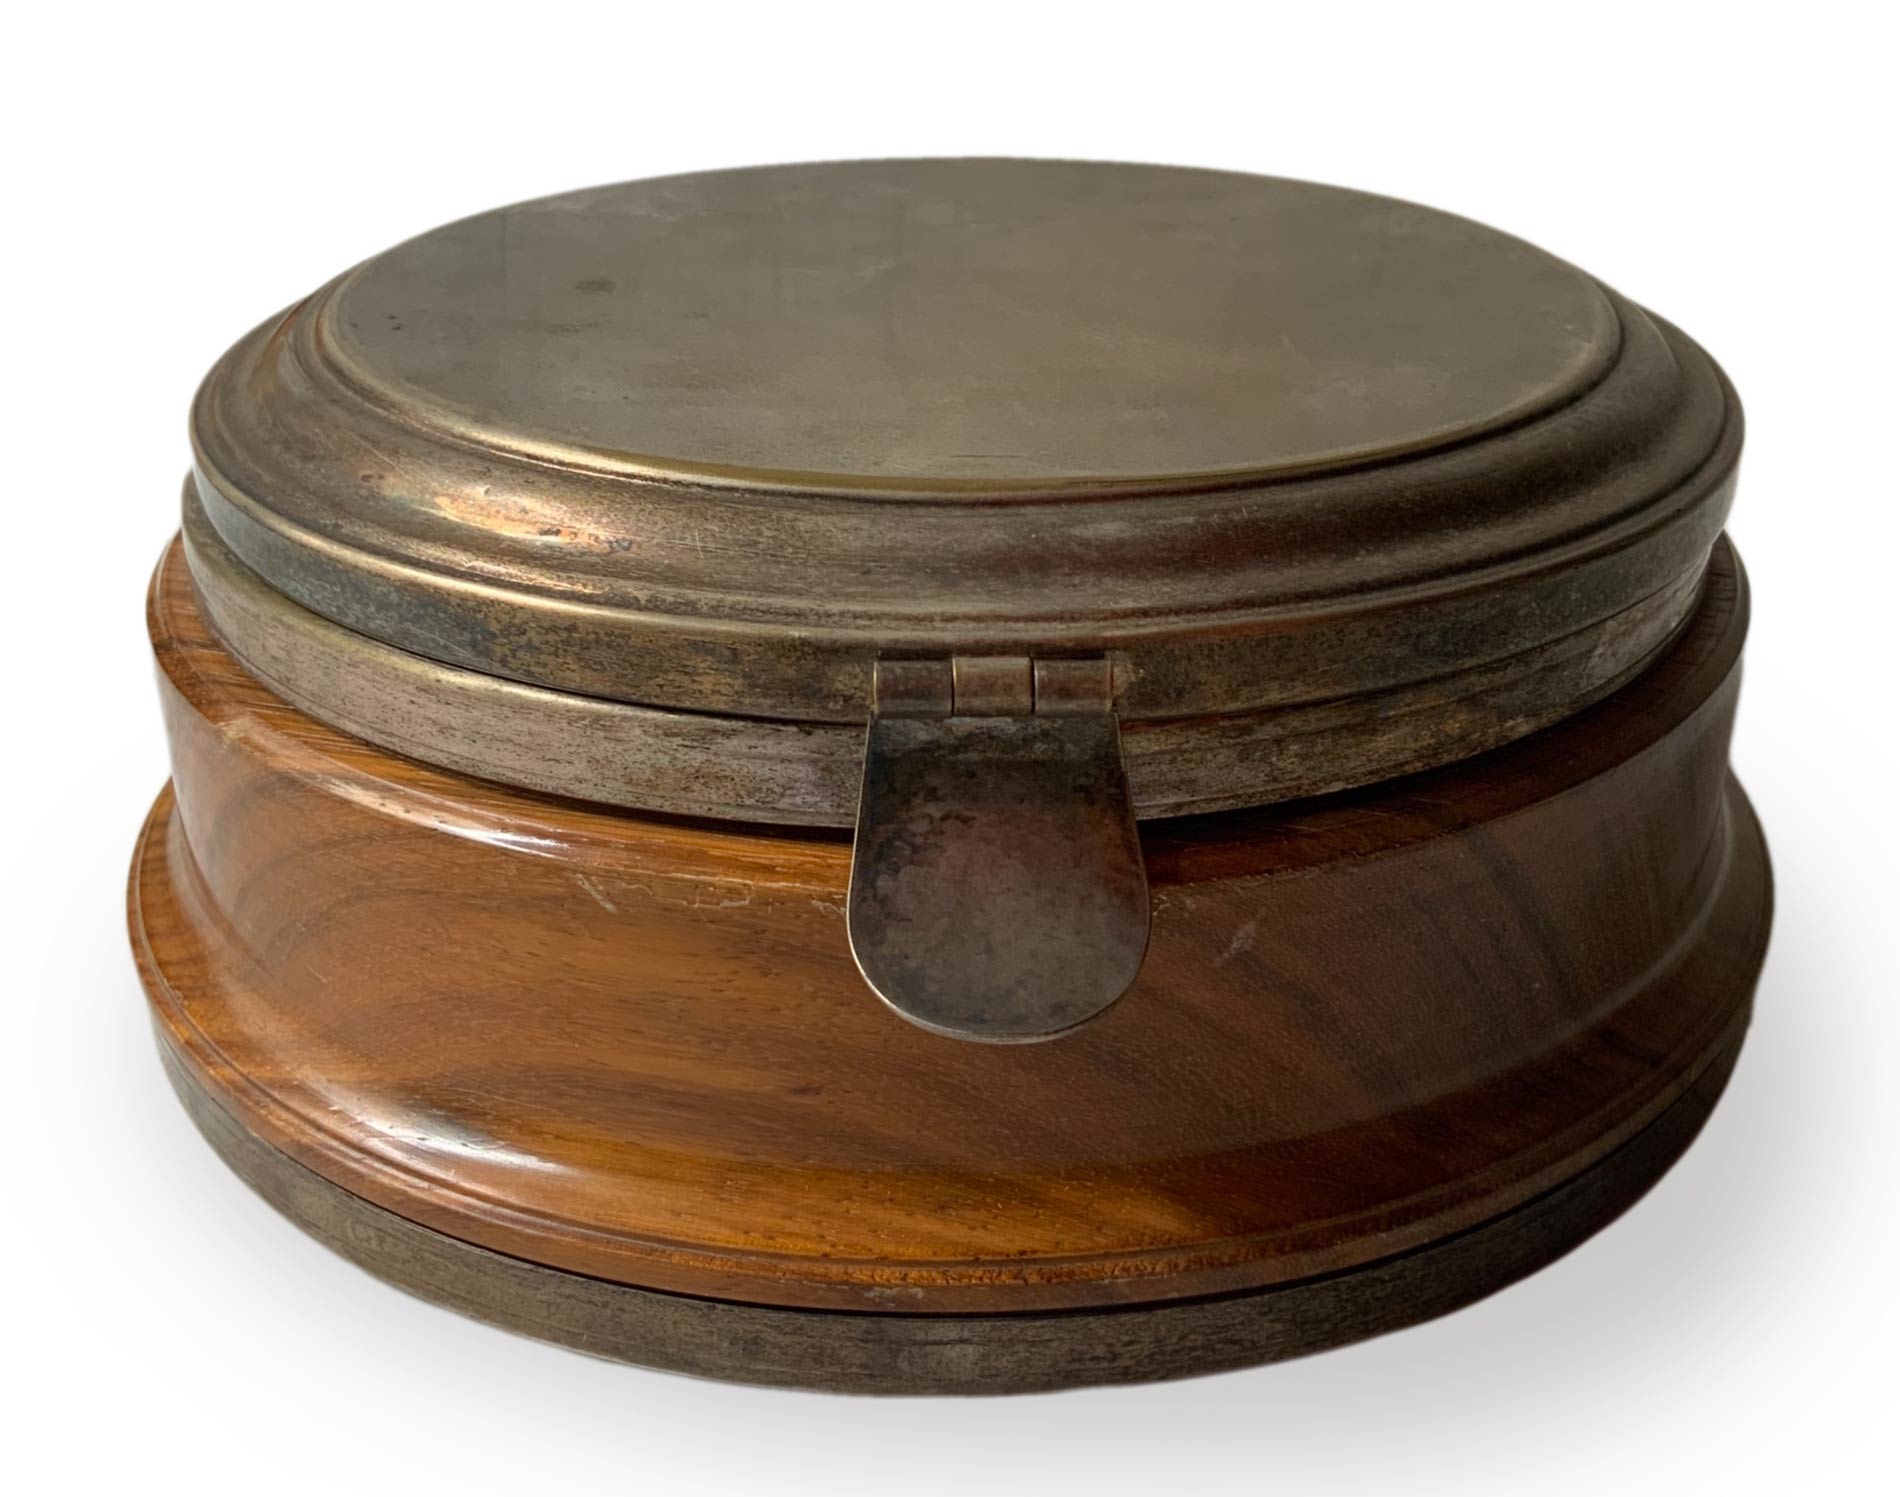 Italian Production, compost in a circular base form of walnut and silver metal lid, Wear and tear. - Image 4 of 5